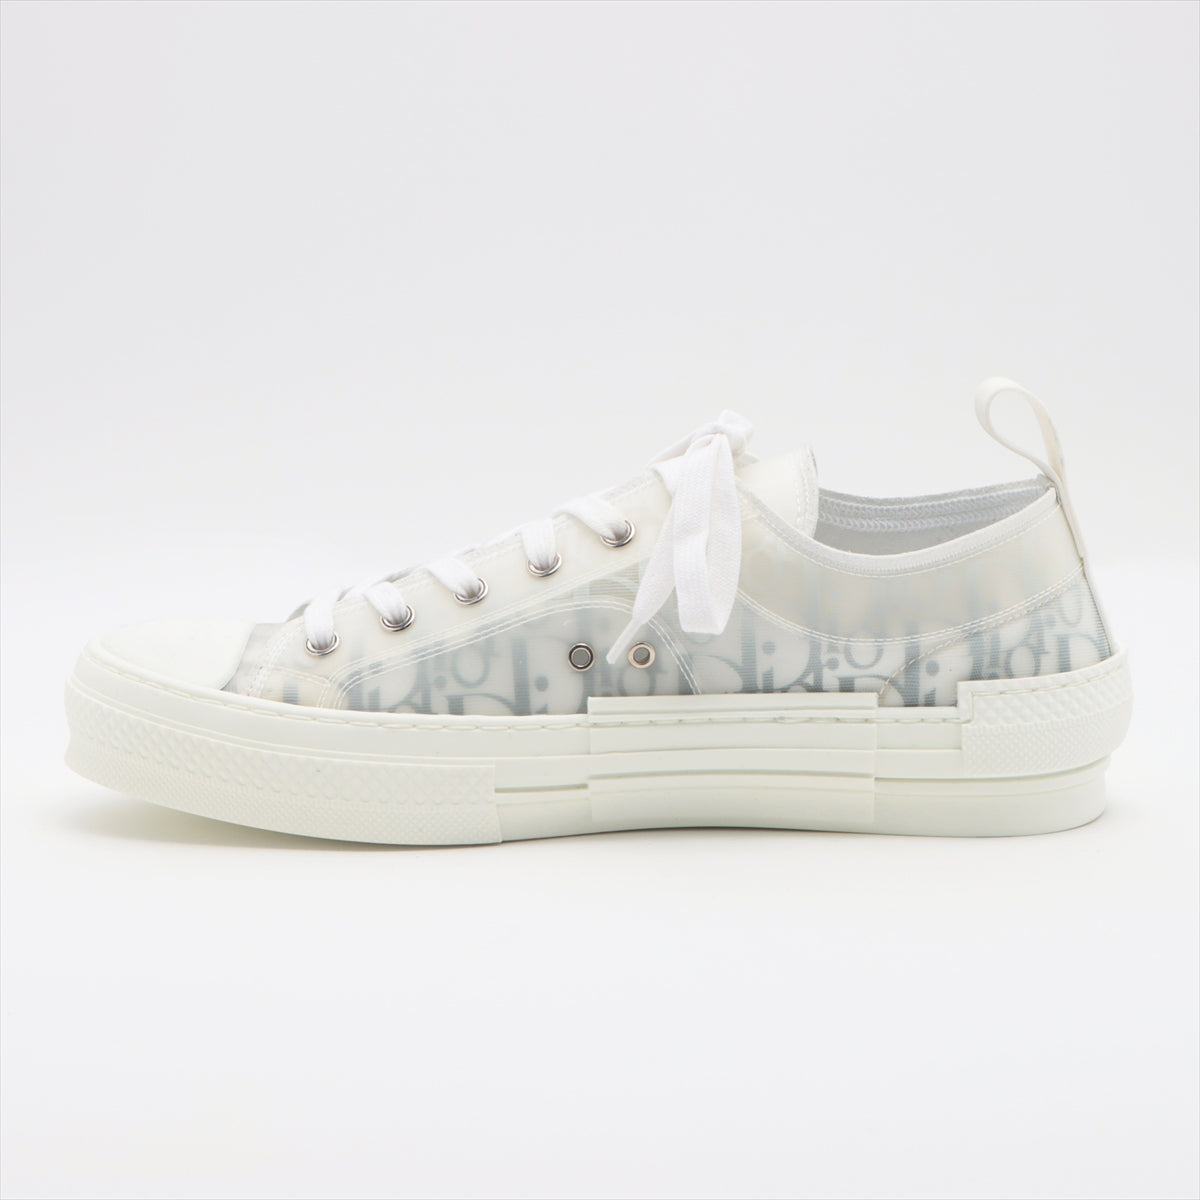 DIOR B23 Fabric Sneakers 41 Men's White Oblique sack Is there a replacement string